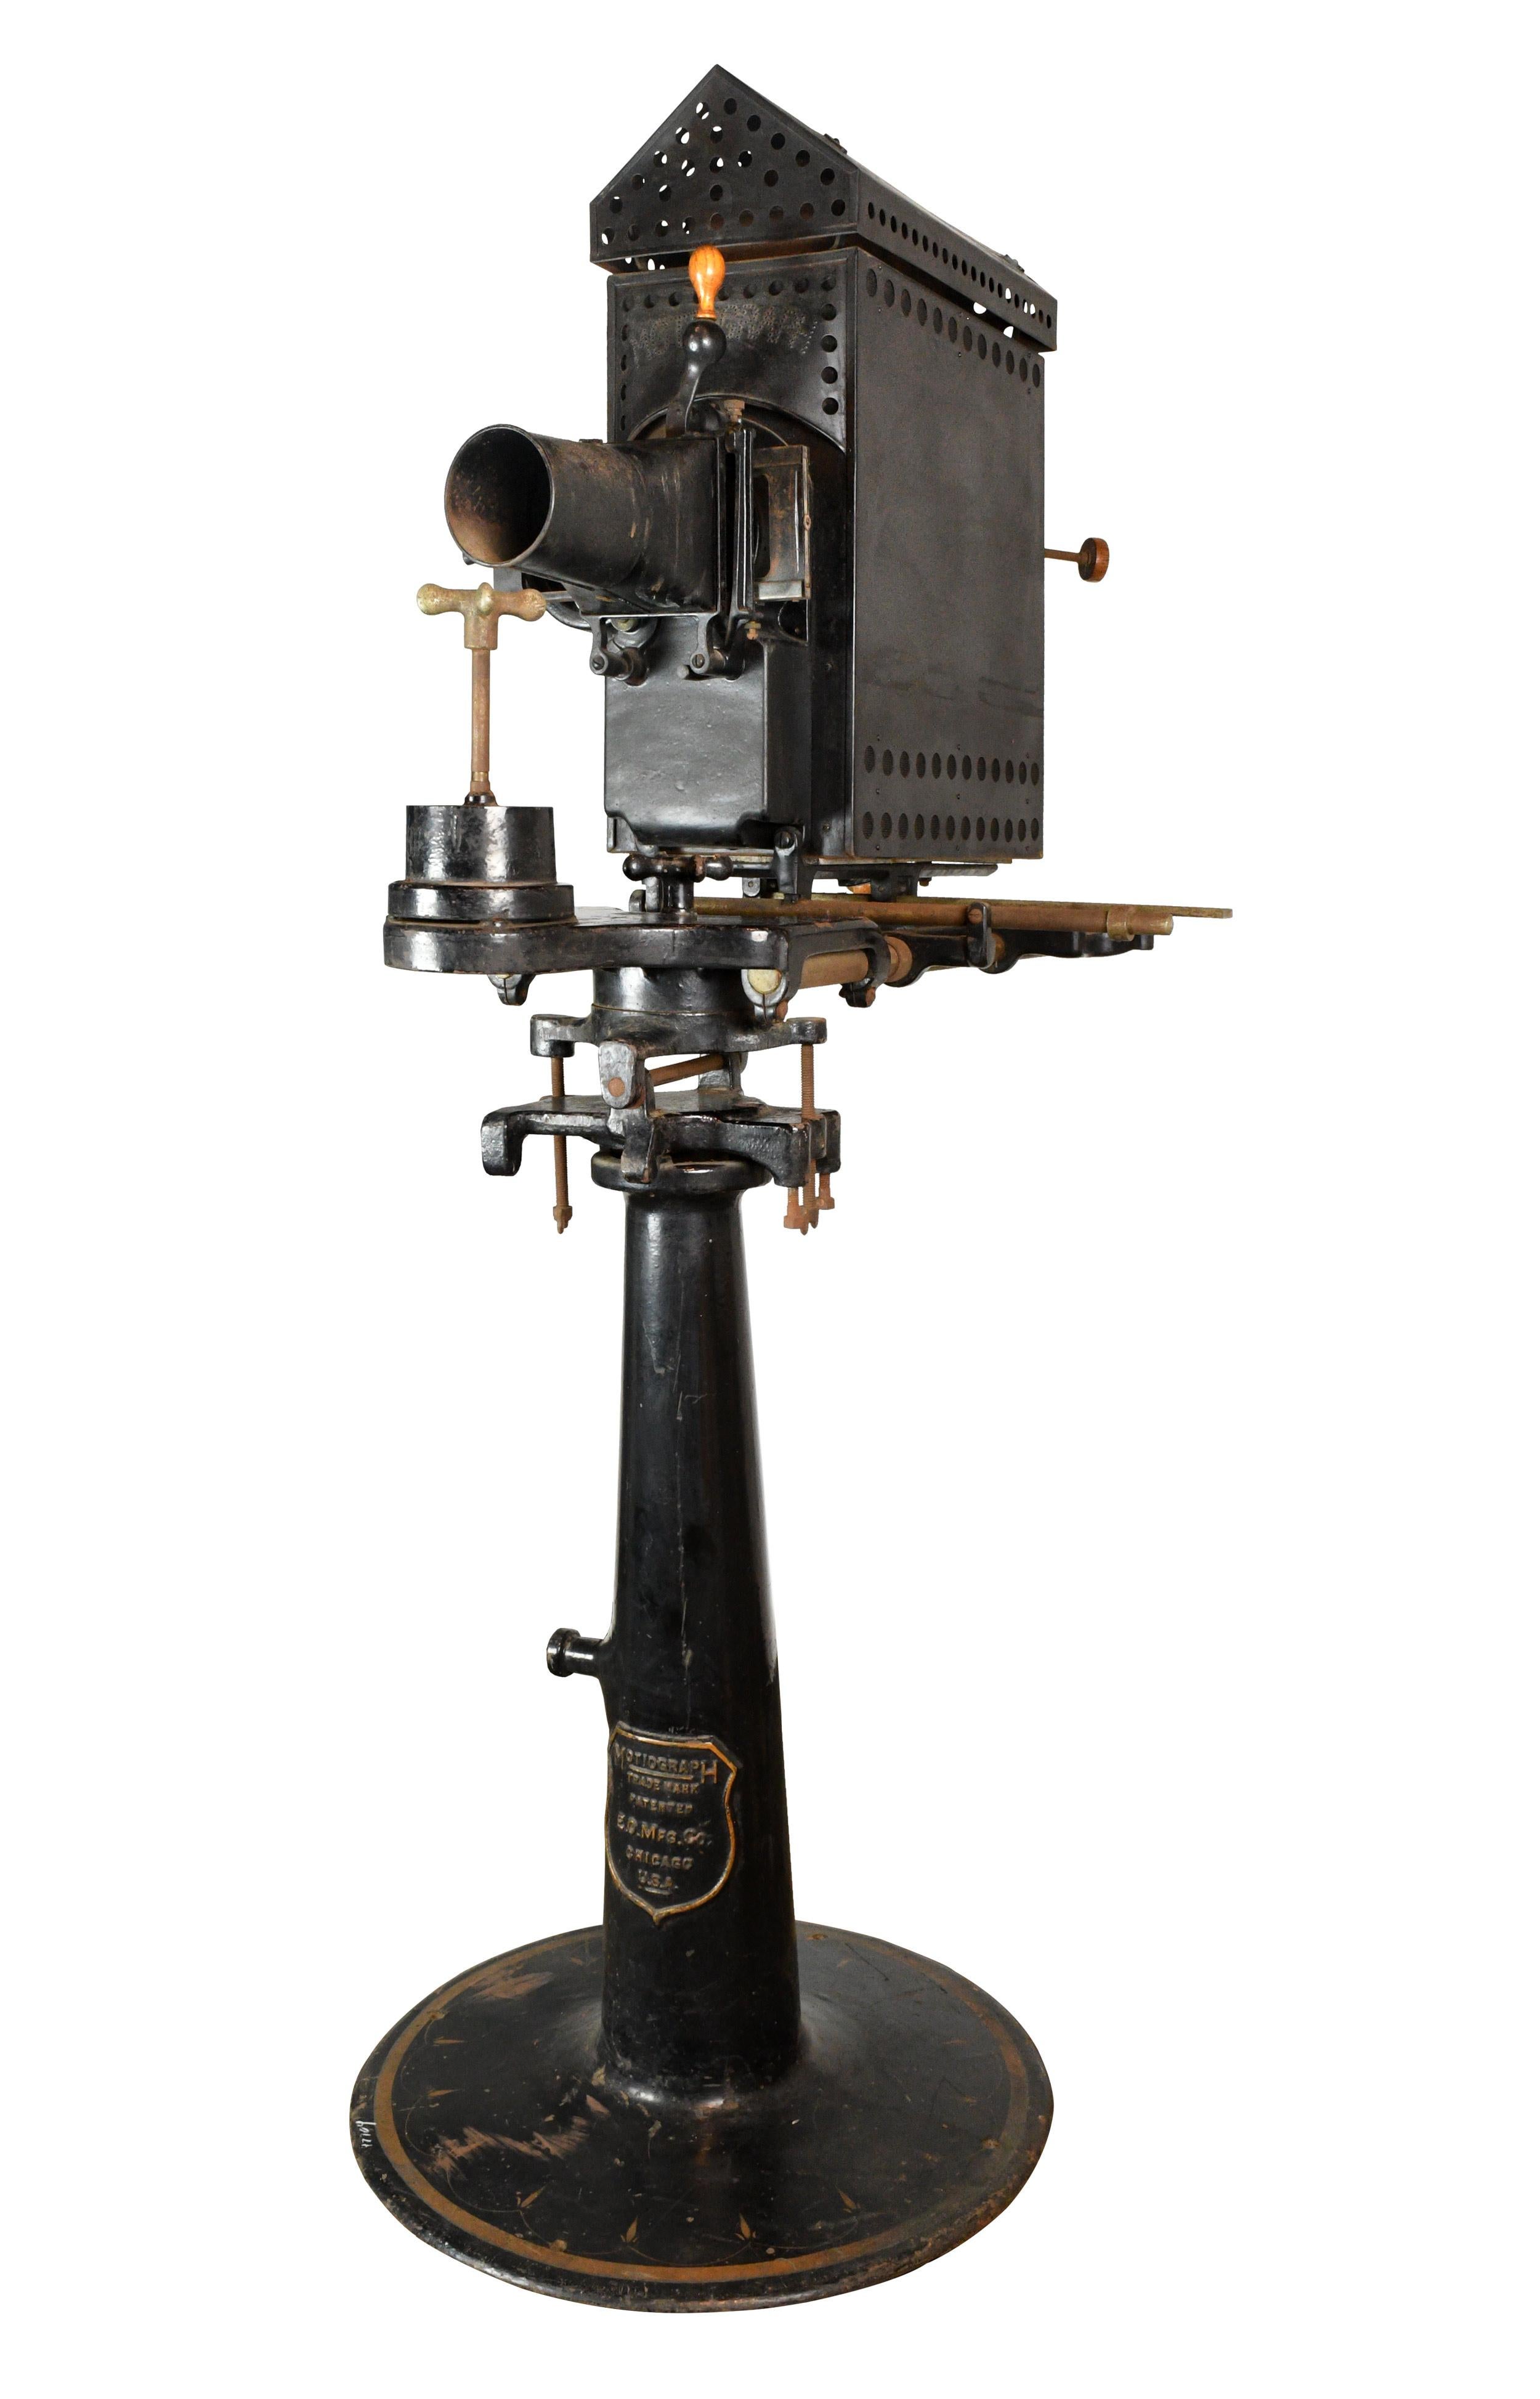 This Motiograph hand cranked silent movie projector would make an excellent conversation piece for the cinema lover, or the perfect project for an industrious DIY’er. An embossed emblem on the side of the pedestal reads “MOTIOGRAPH - TRADEMARK